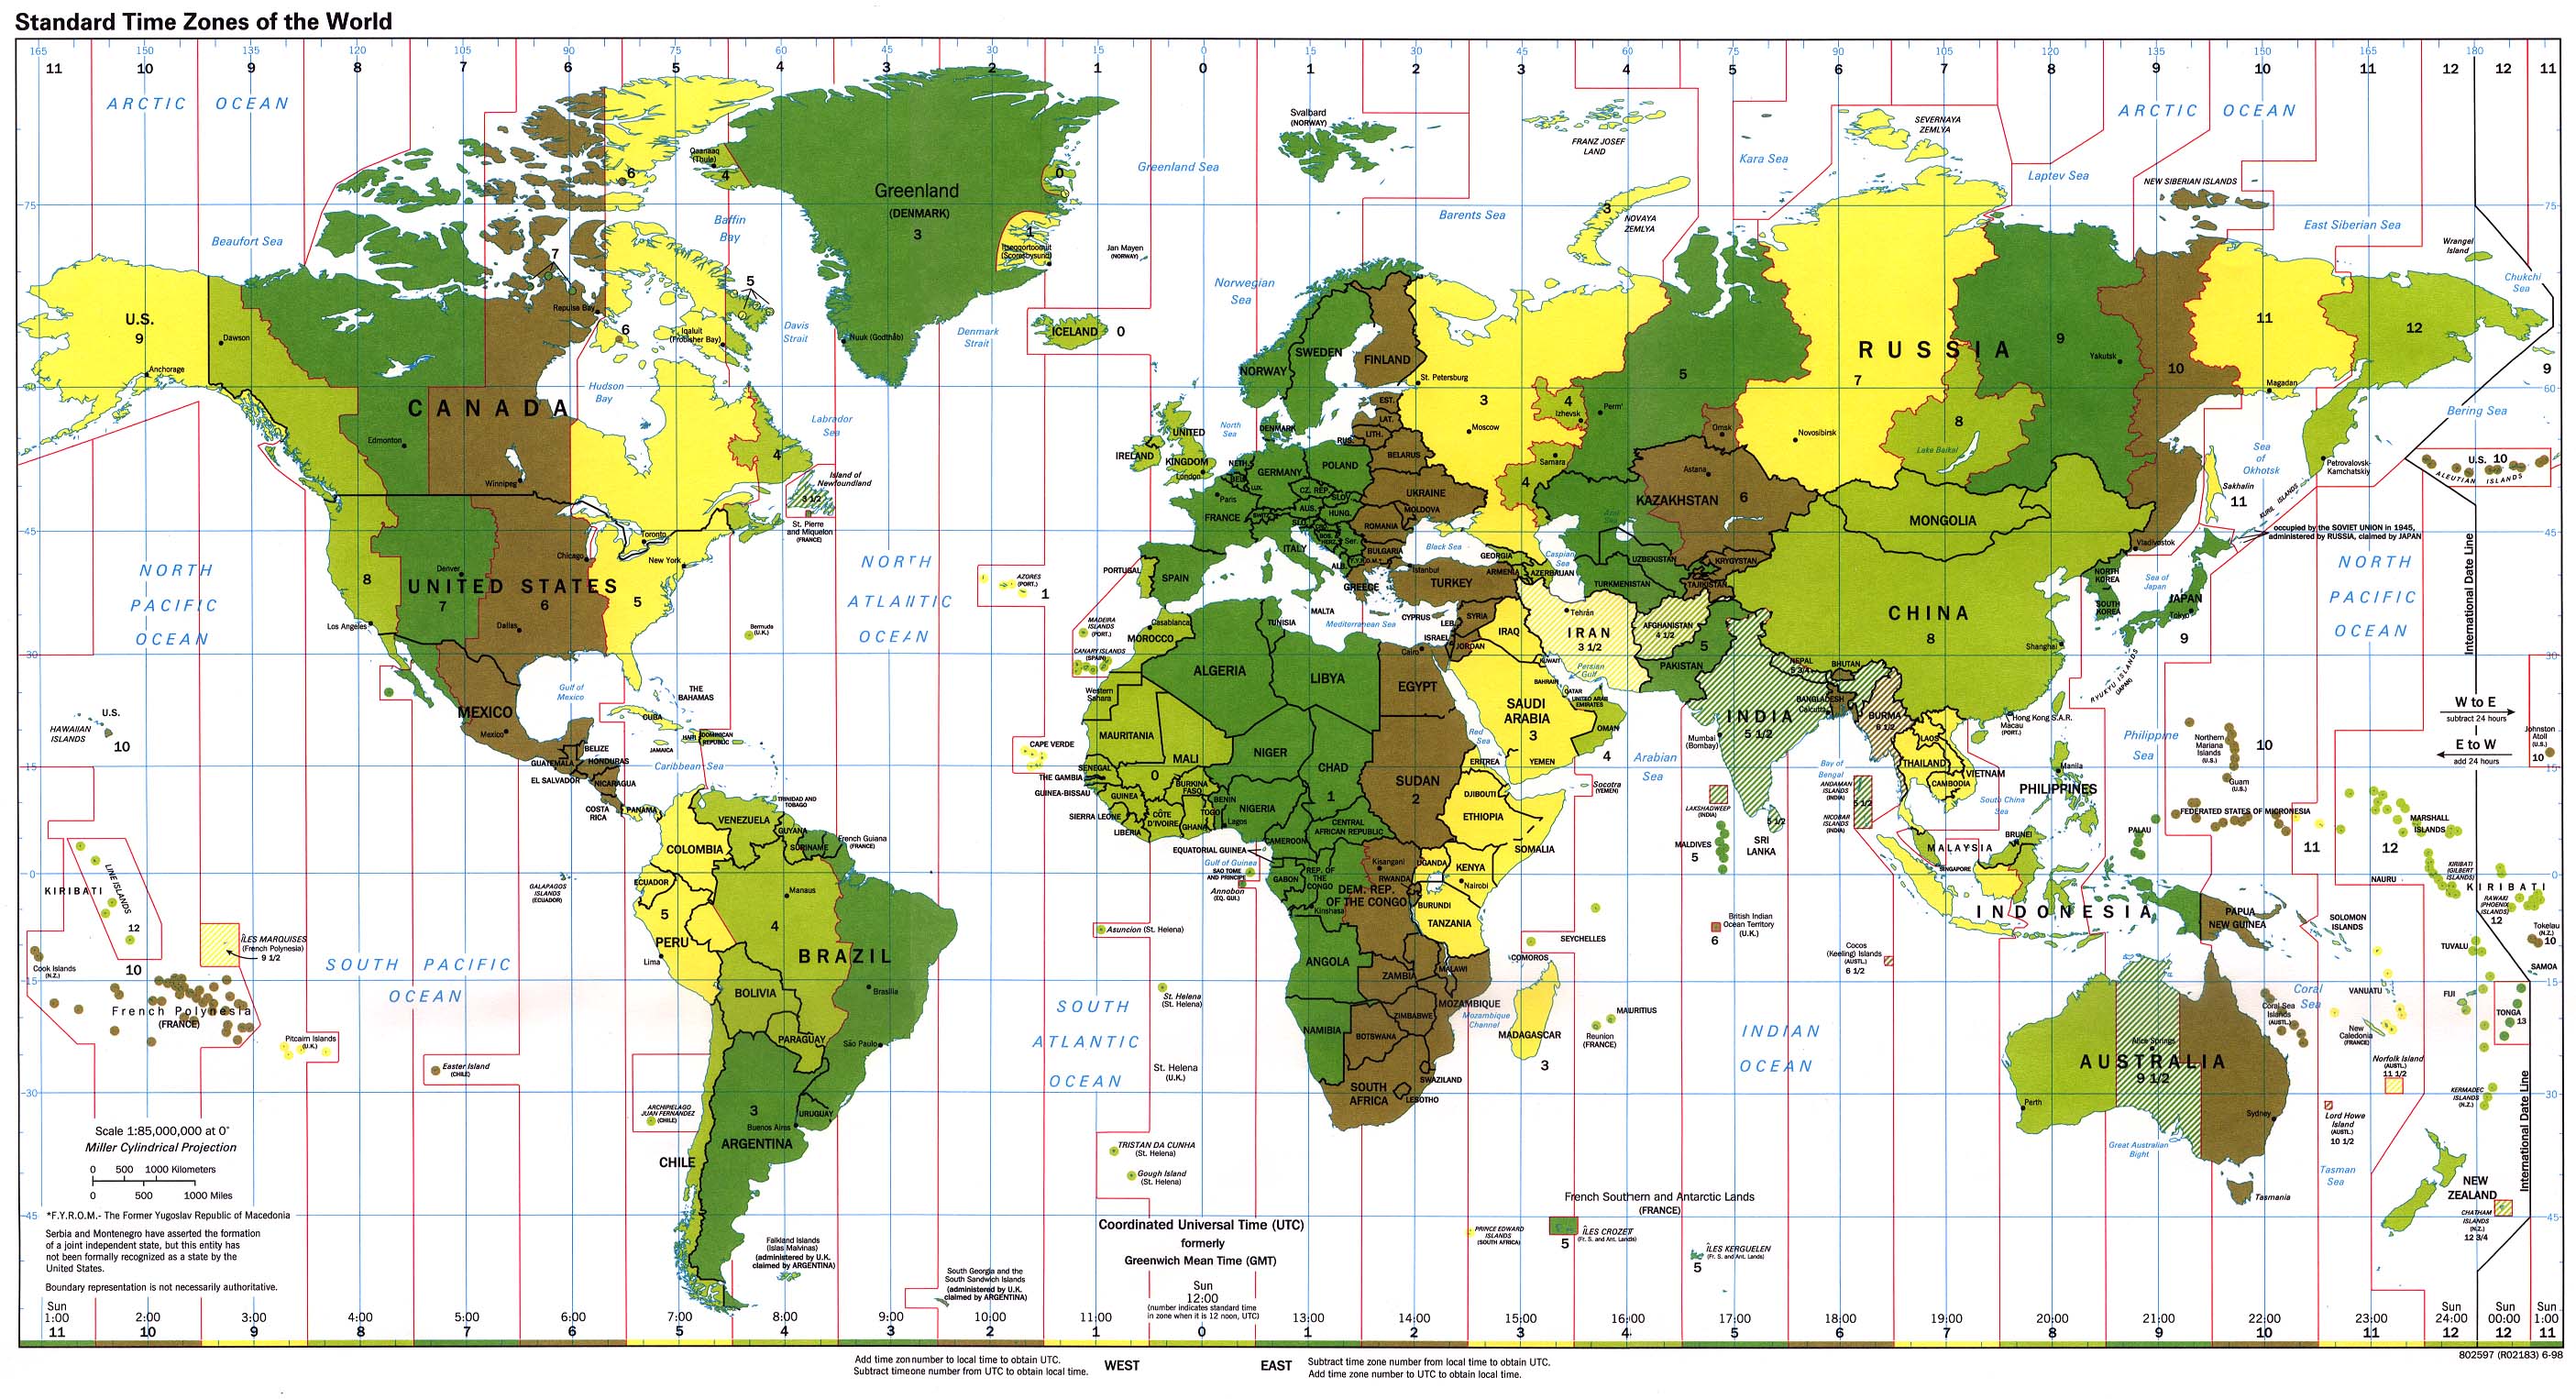 Map Of The World. Standard Time Zones of the World 1998 (774K) 